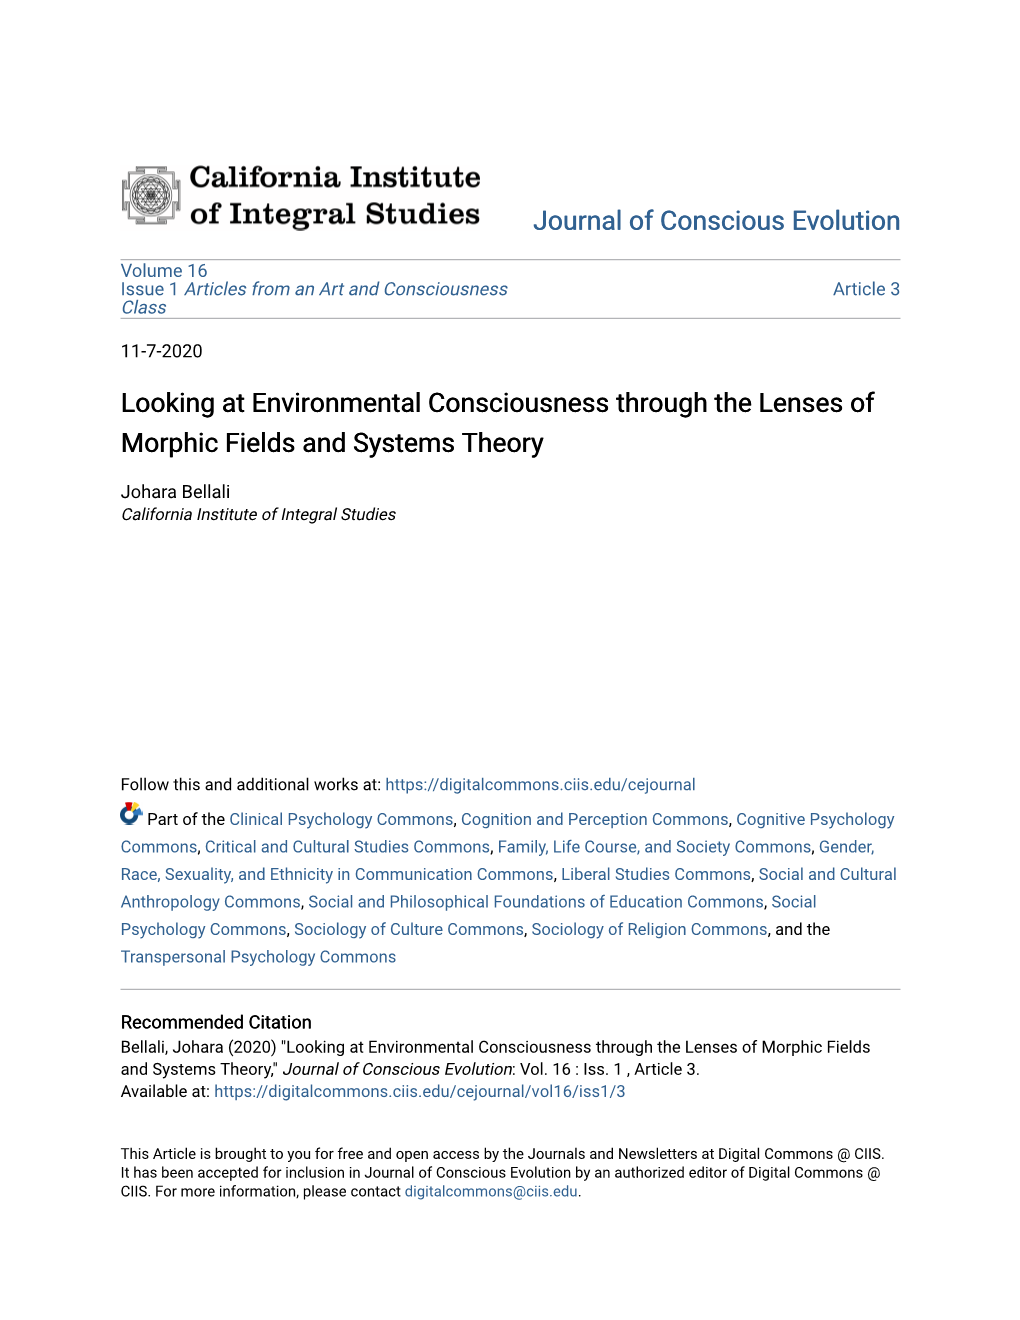 Looking at Environmental Consciousness Through the Lenses of Morphic Fields and Systems Theory